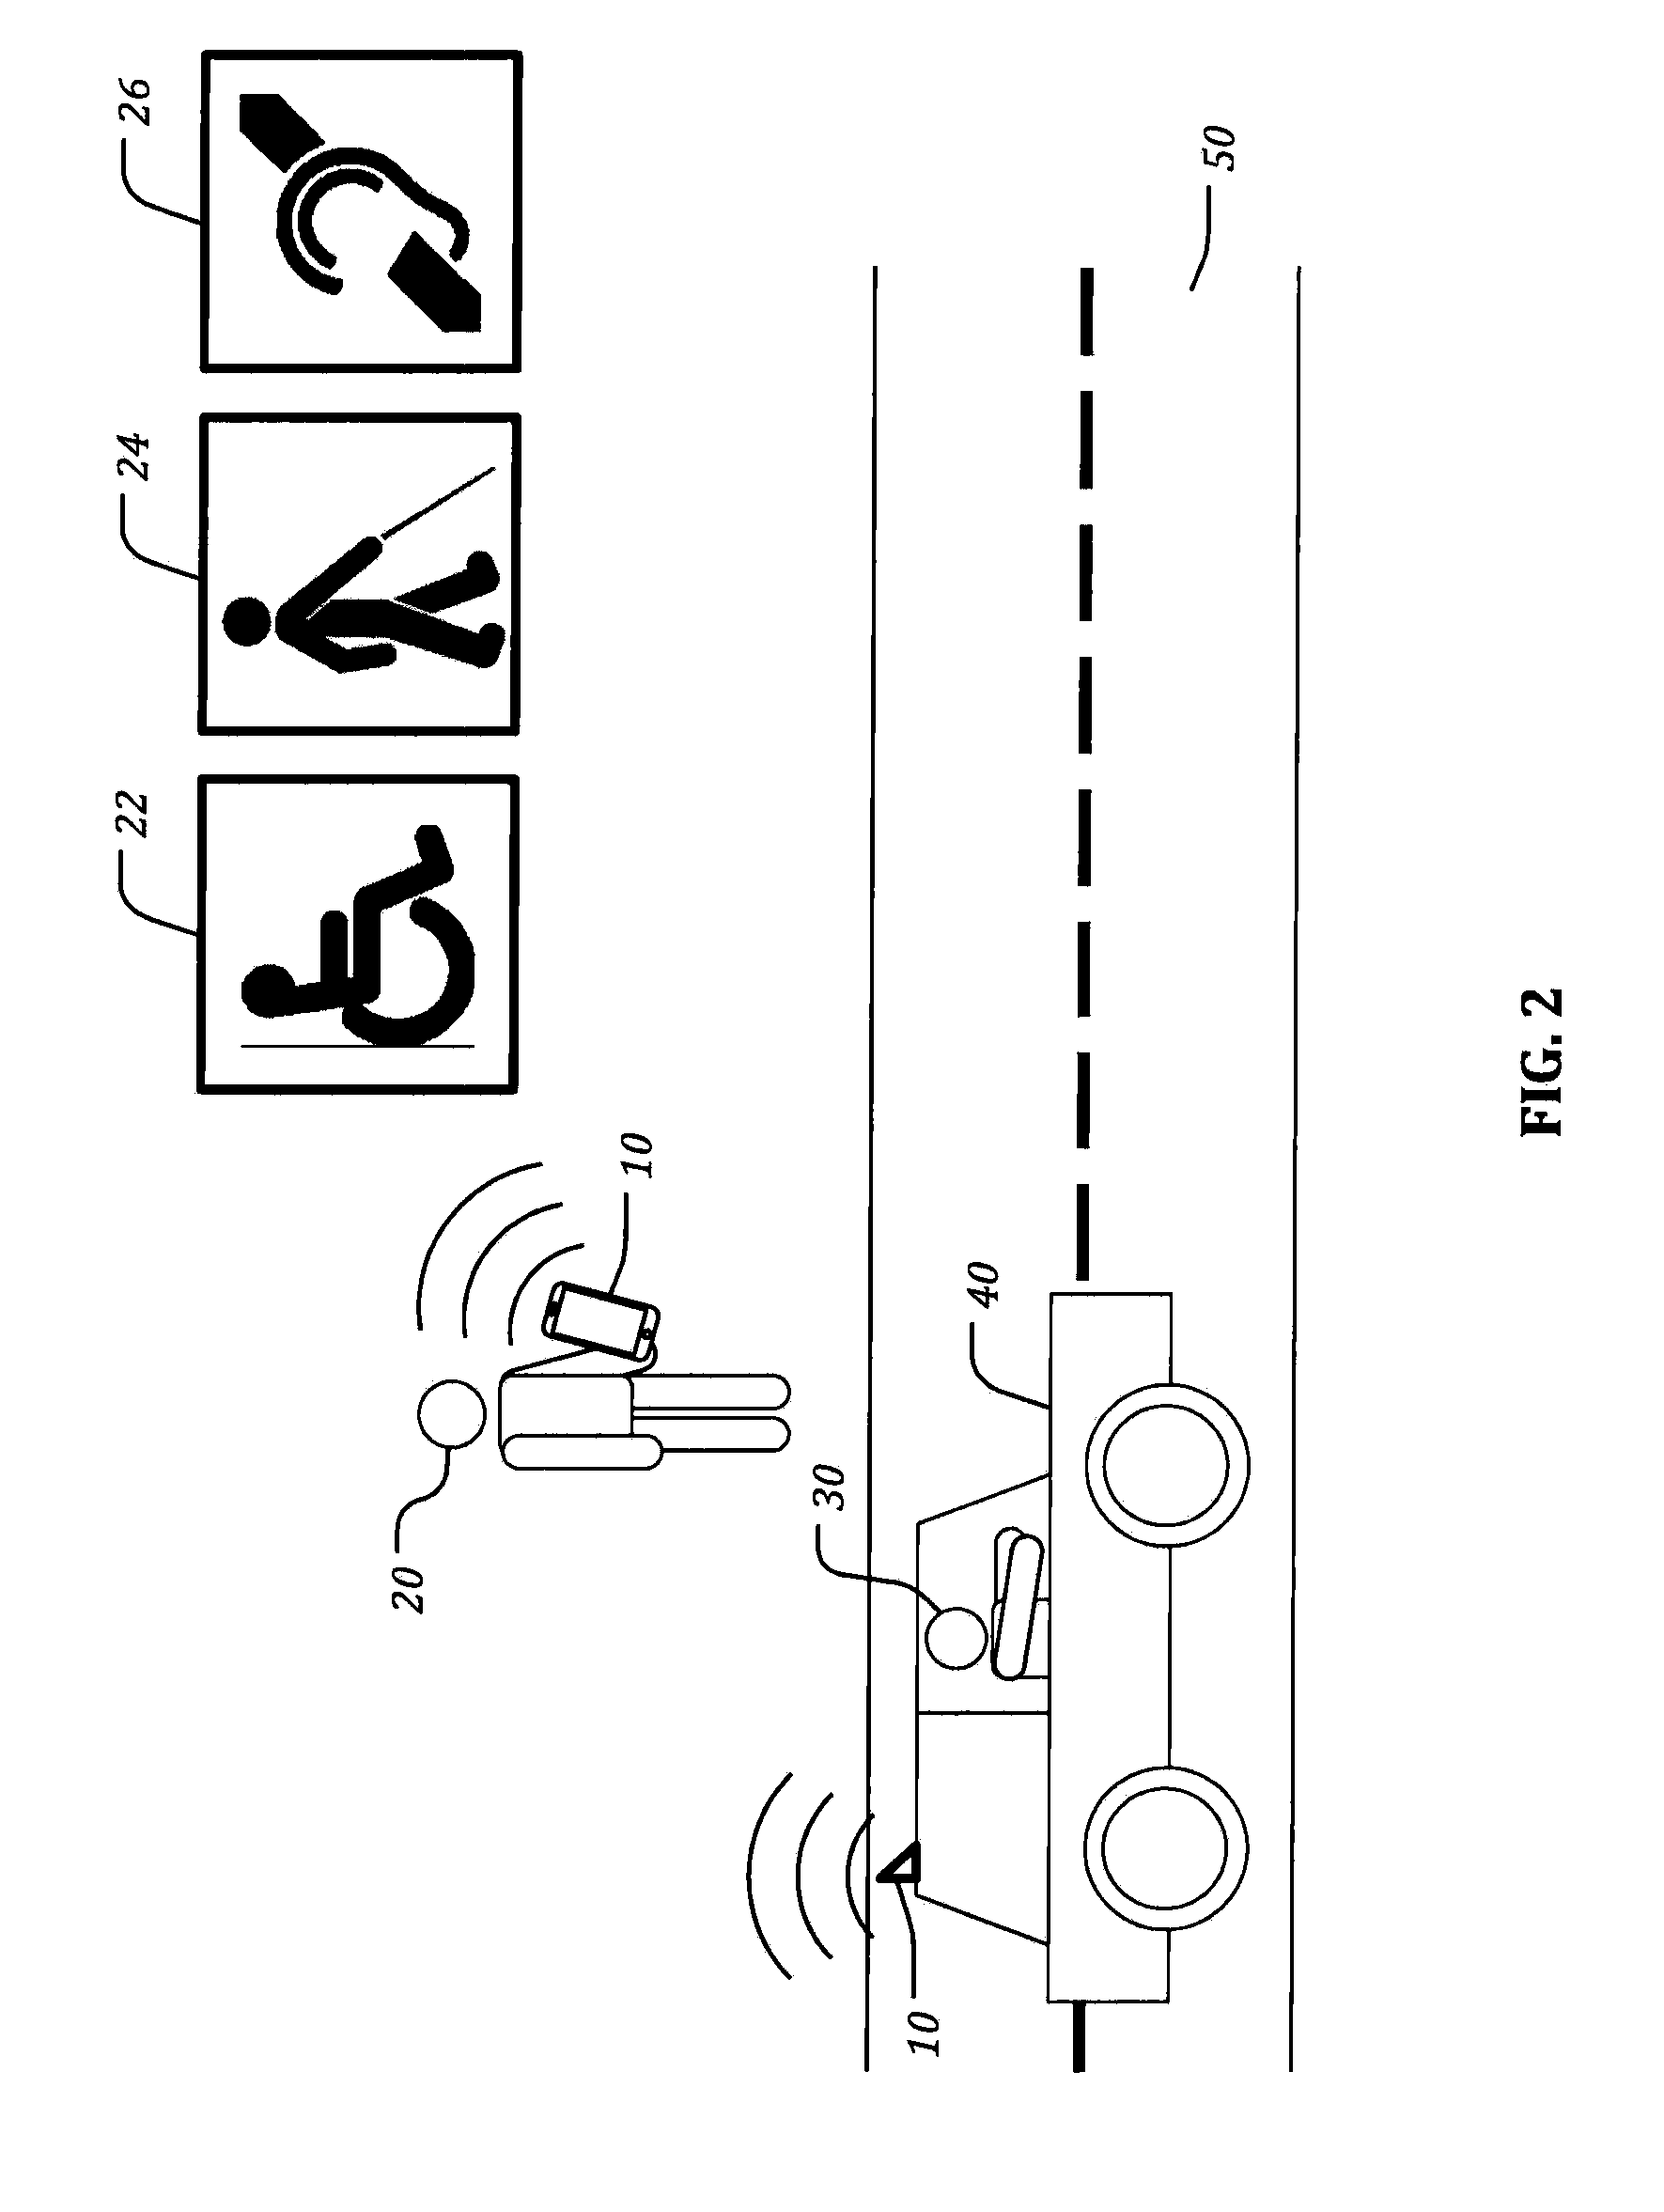 Vehicle to pedestrian communication system and method